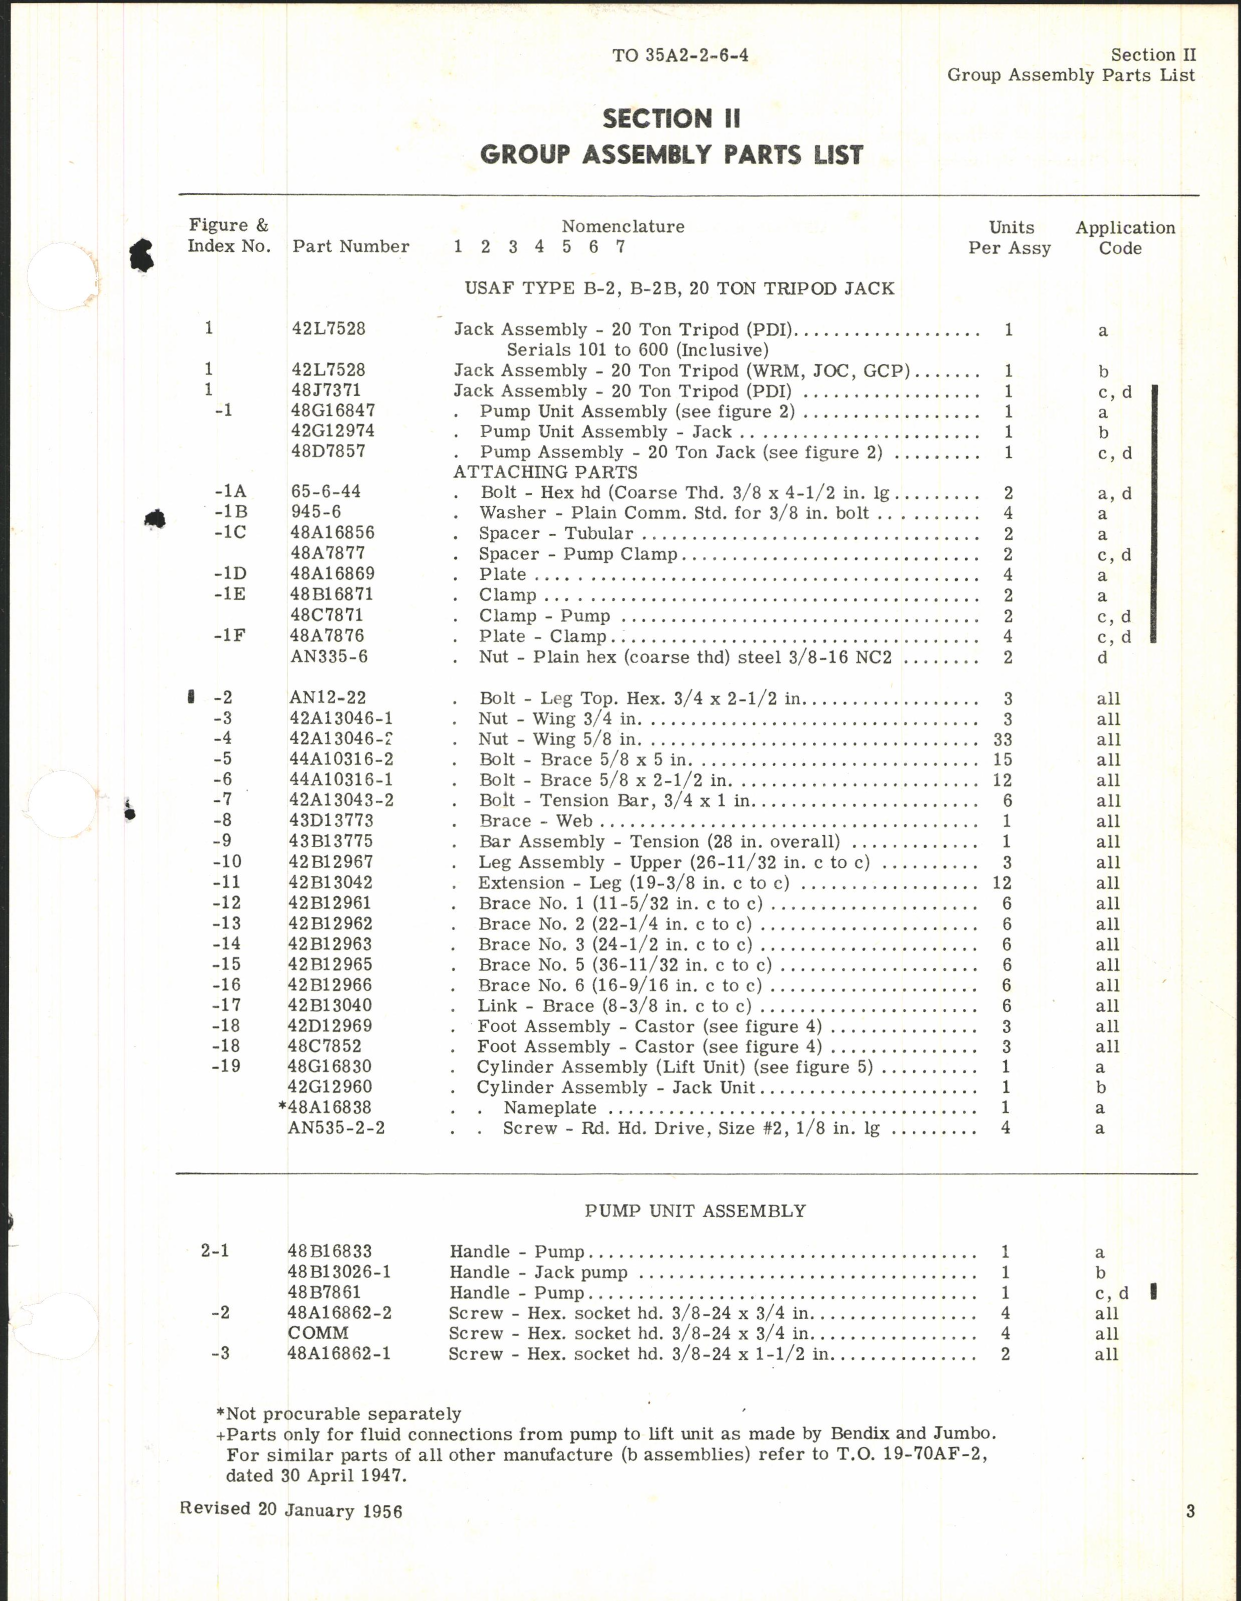 Sample page 3 from AirCorps Library document: Parts Catalog for Types B-2 and B-2B 20-Ton Hydraulic Tripod Jacks